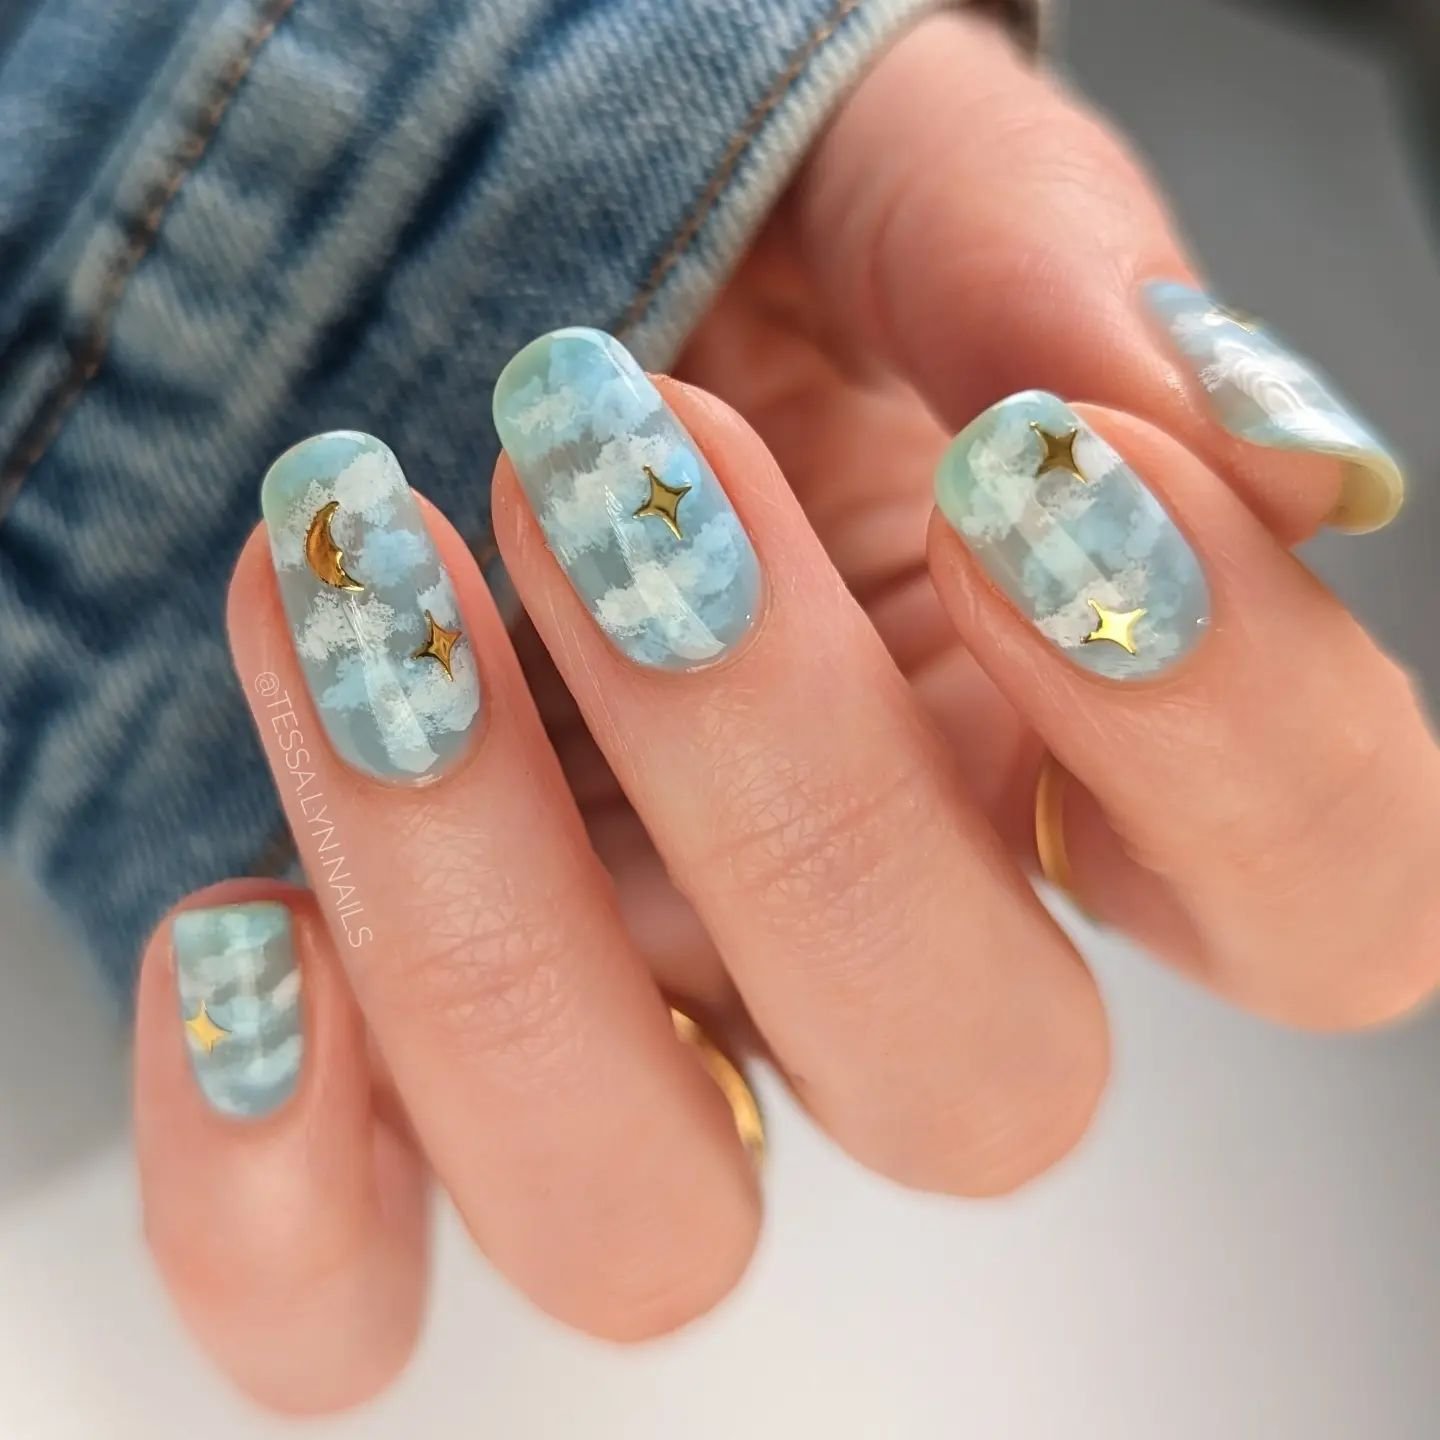 5 - Picture of Jelly Nails